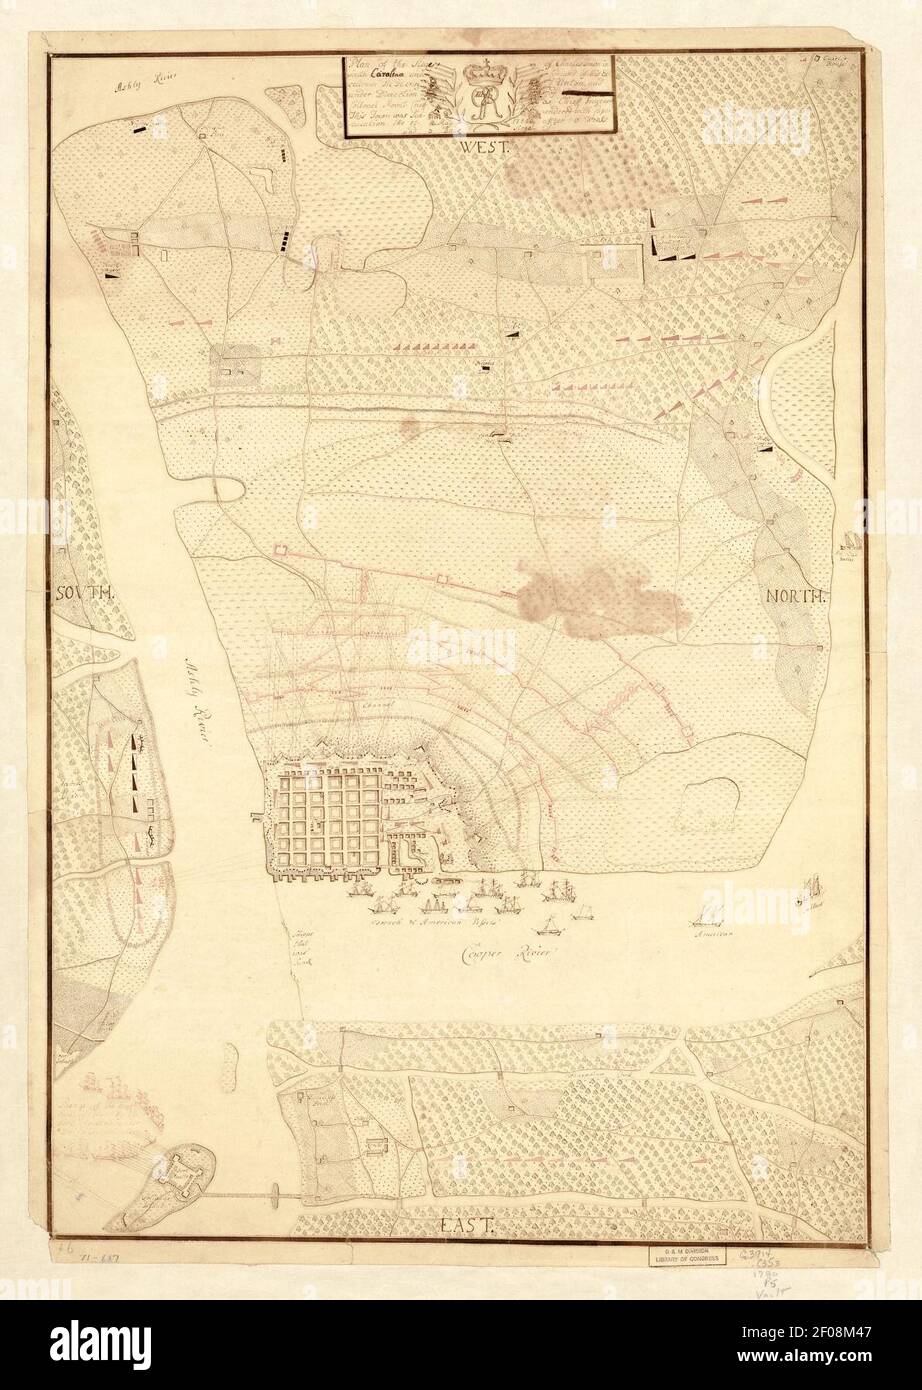 Plan of the siege of Charles Town in South Carolina under command of His Excellence Sir Henry Clinton and under direction of ... Collonel Mount-Crieff as chief ingener, this town was surrendered with Stock Photo